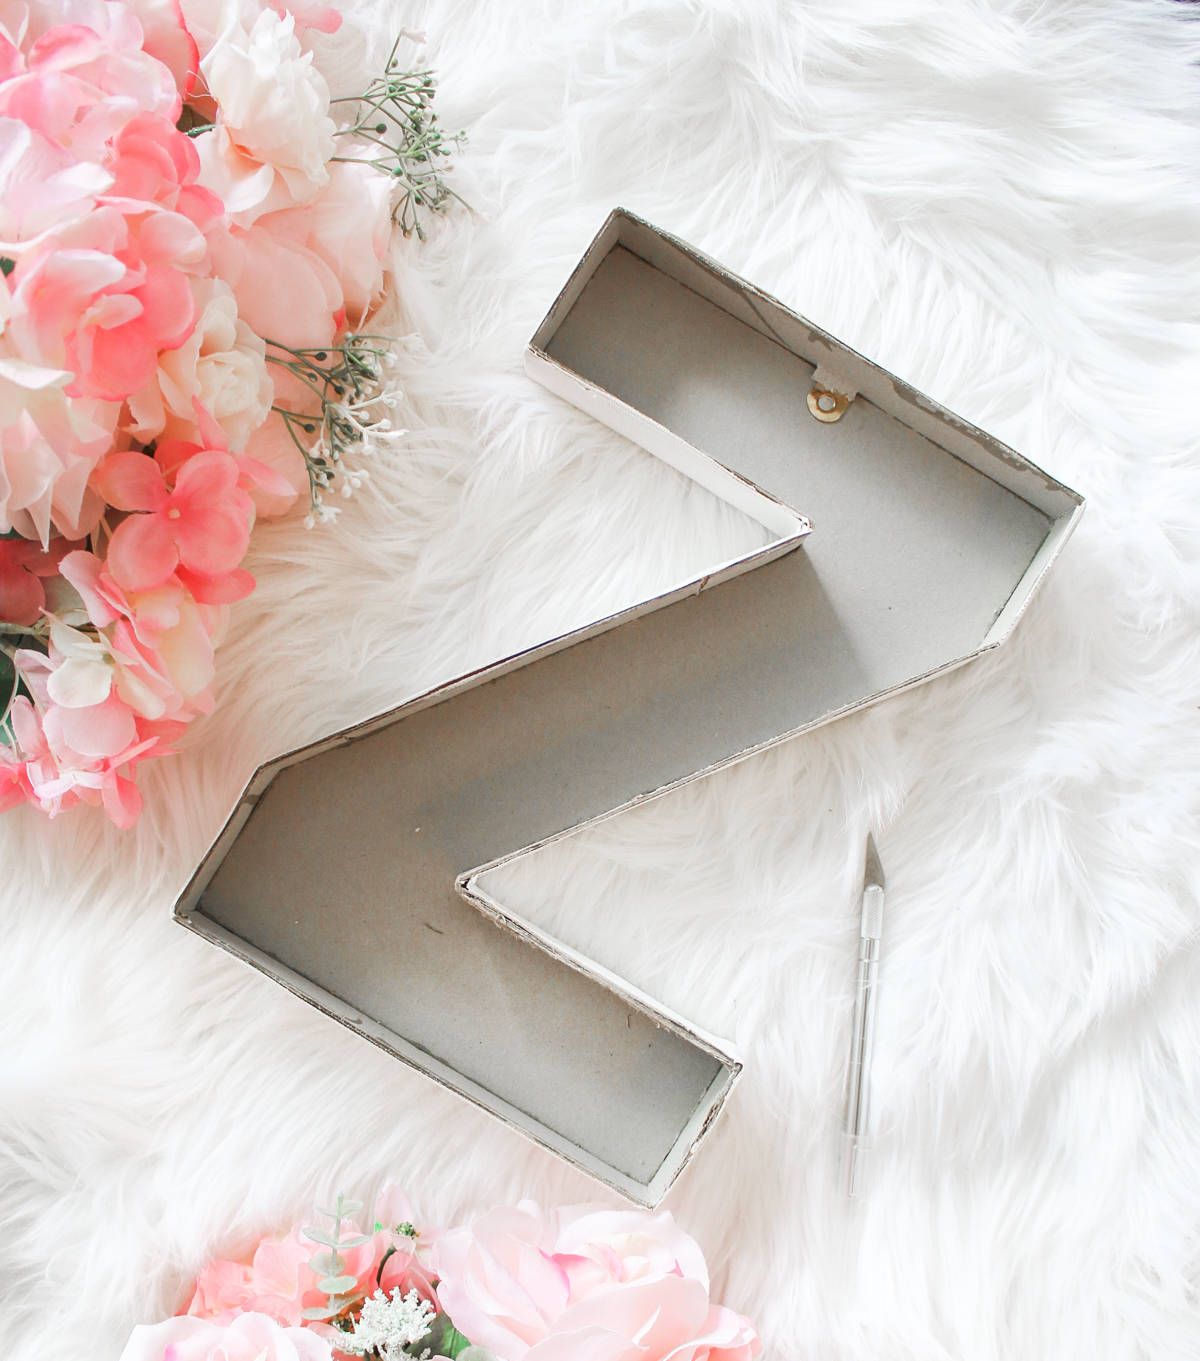 DIY Floral Monogrammed Door Hanger by southern lifestyle blogger Stephanie Ziajka from Diary of a Debutante, DIY birthday gifts for her, diy monogram door hanger, diy monogram letters